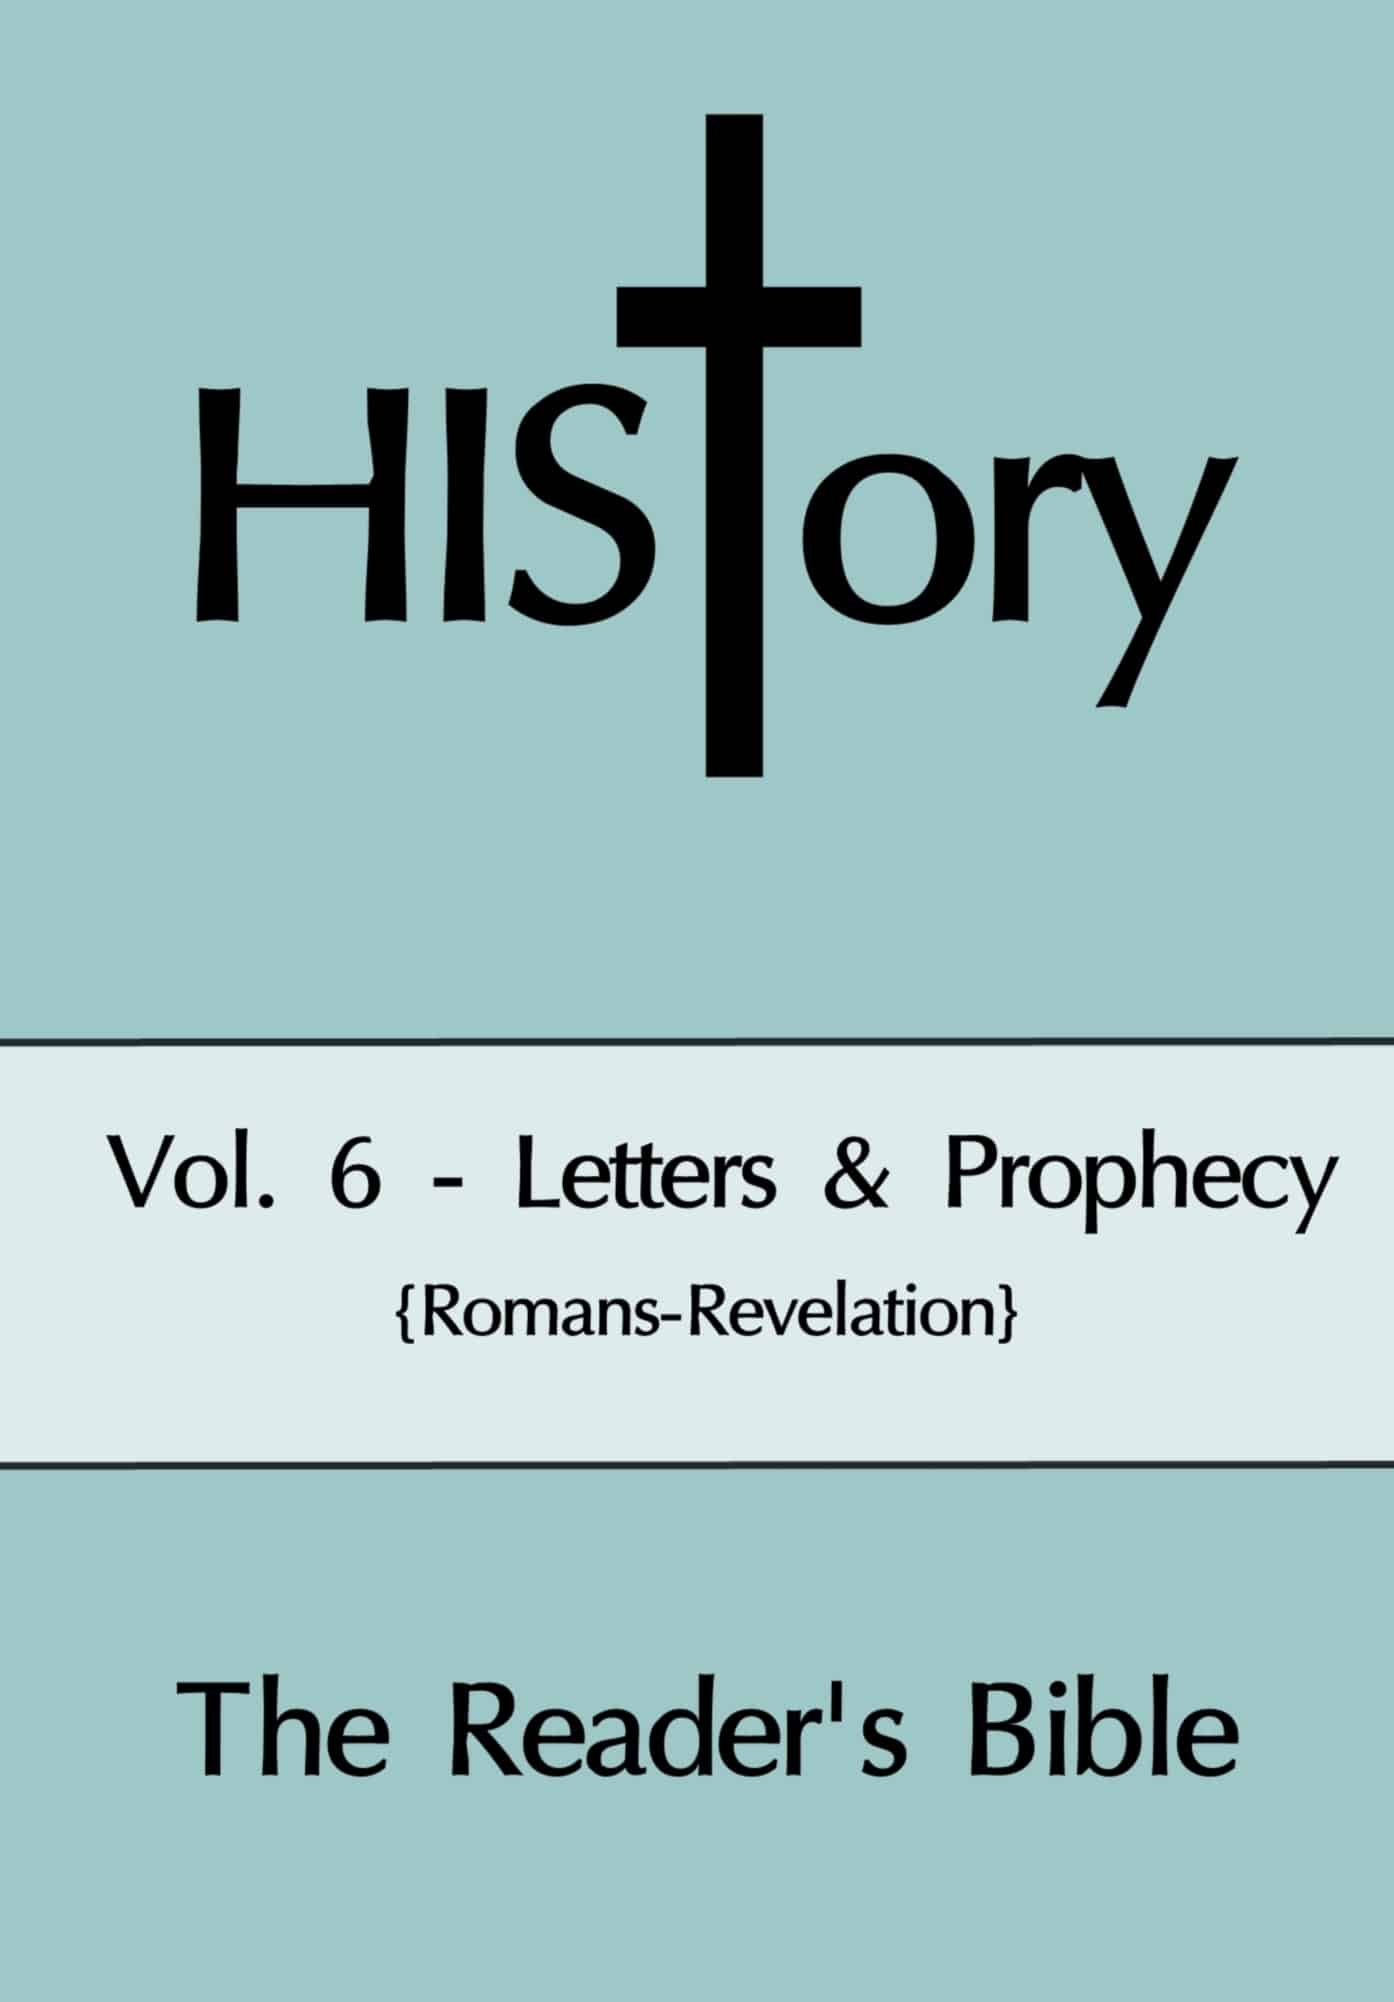 HIStory: The Reader’s Bible Vol. 6 – Letters & Prophecy {Romans-Revelation} Now Available!